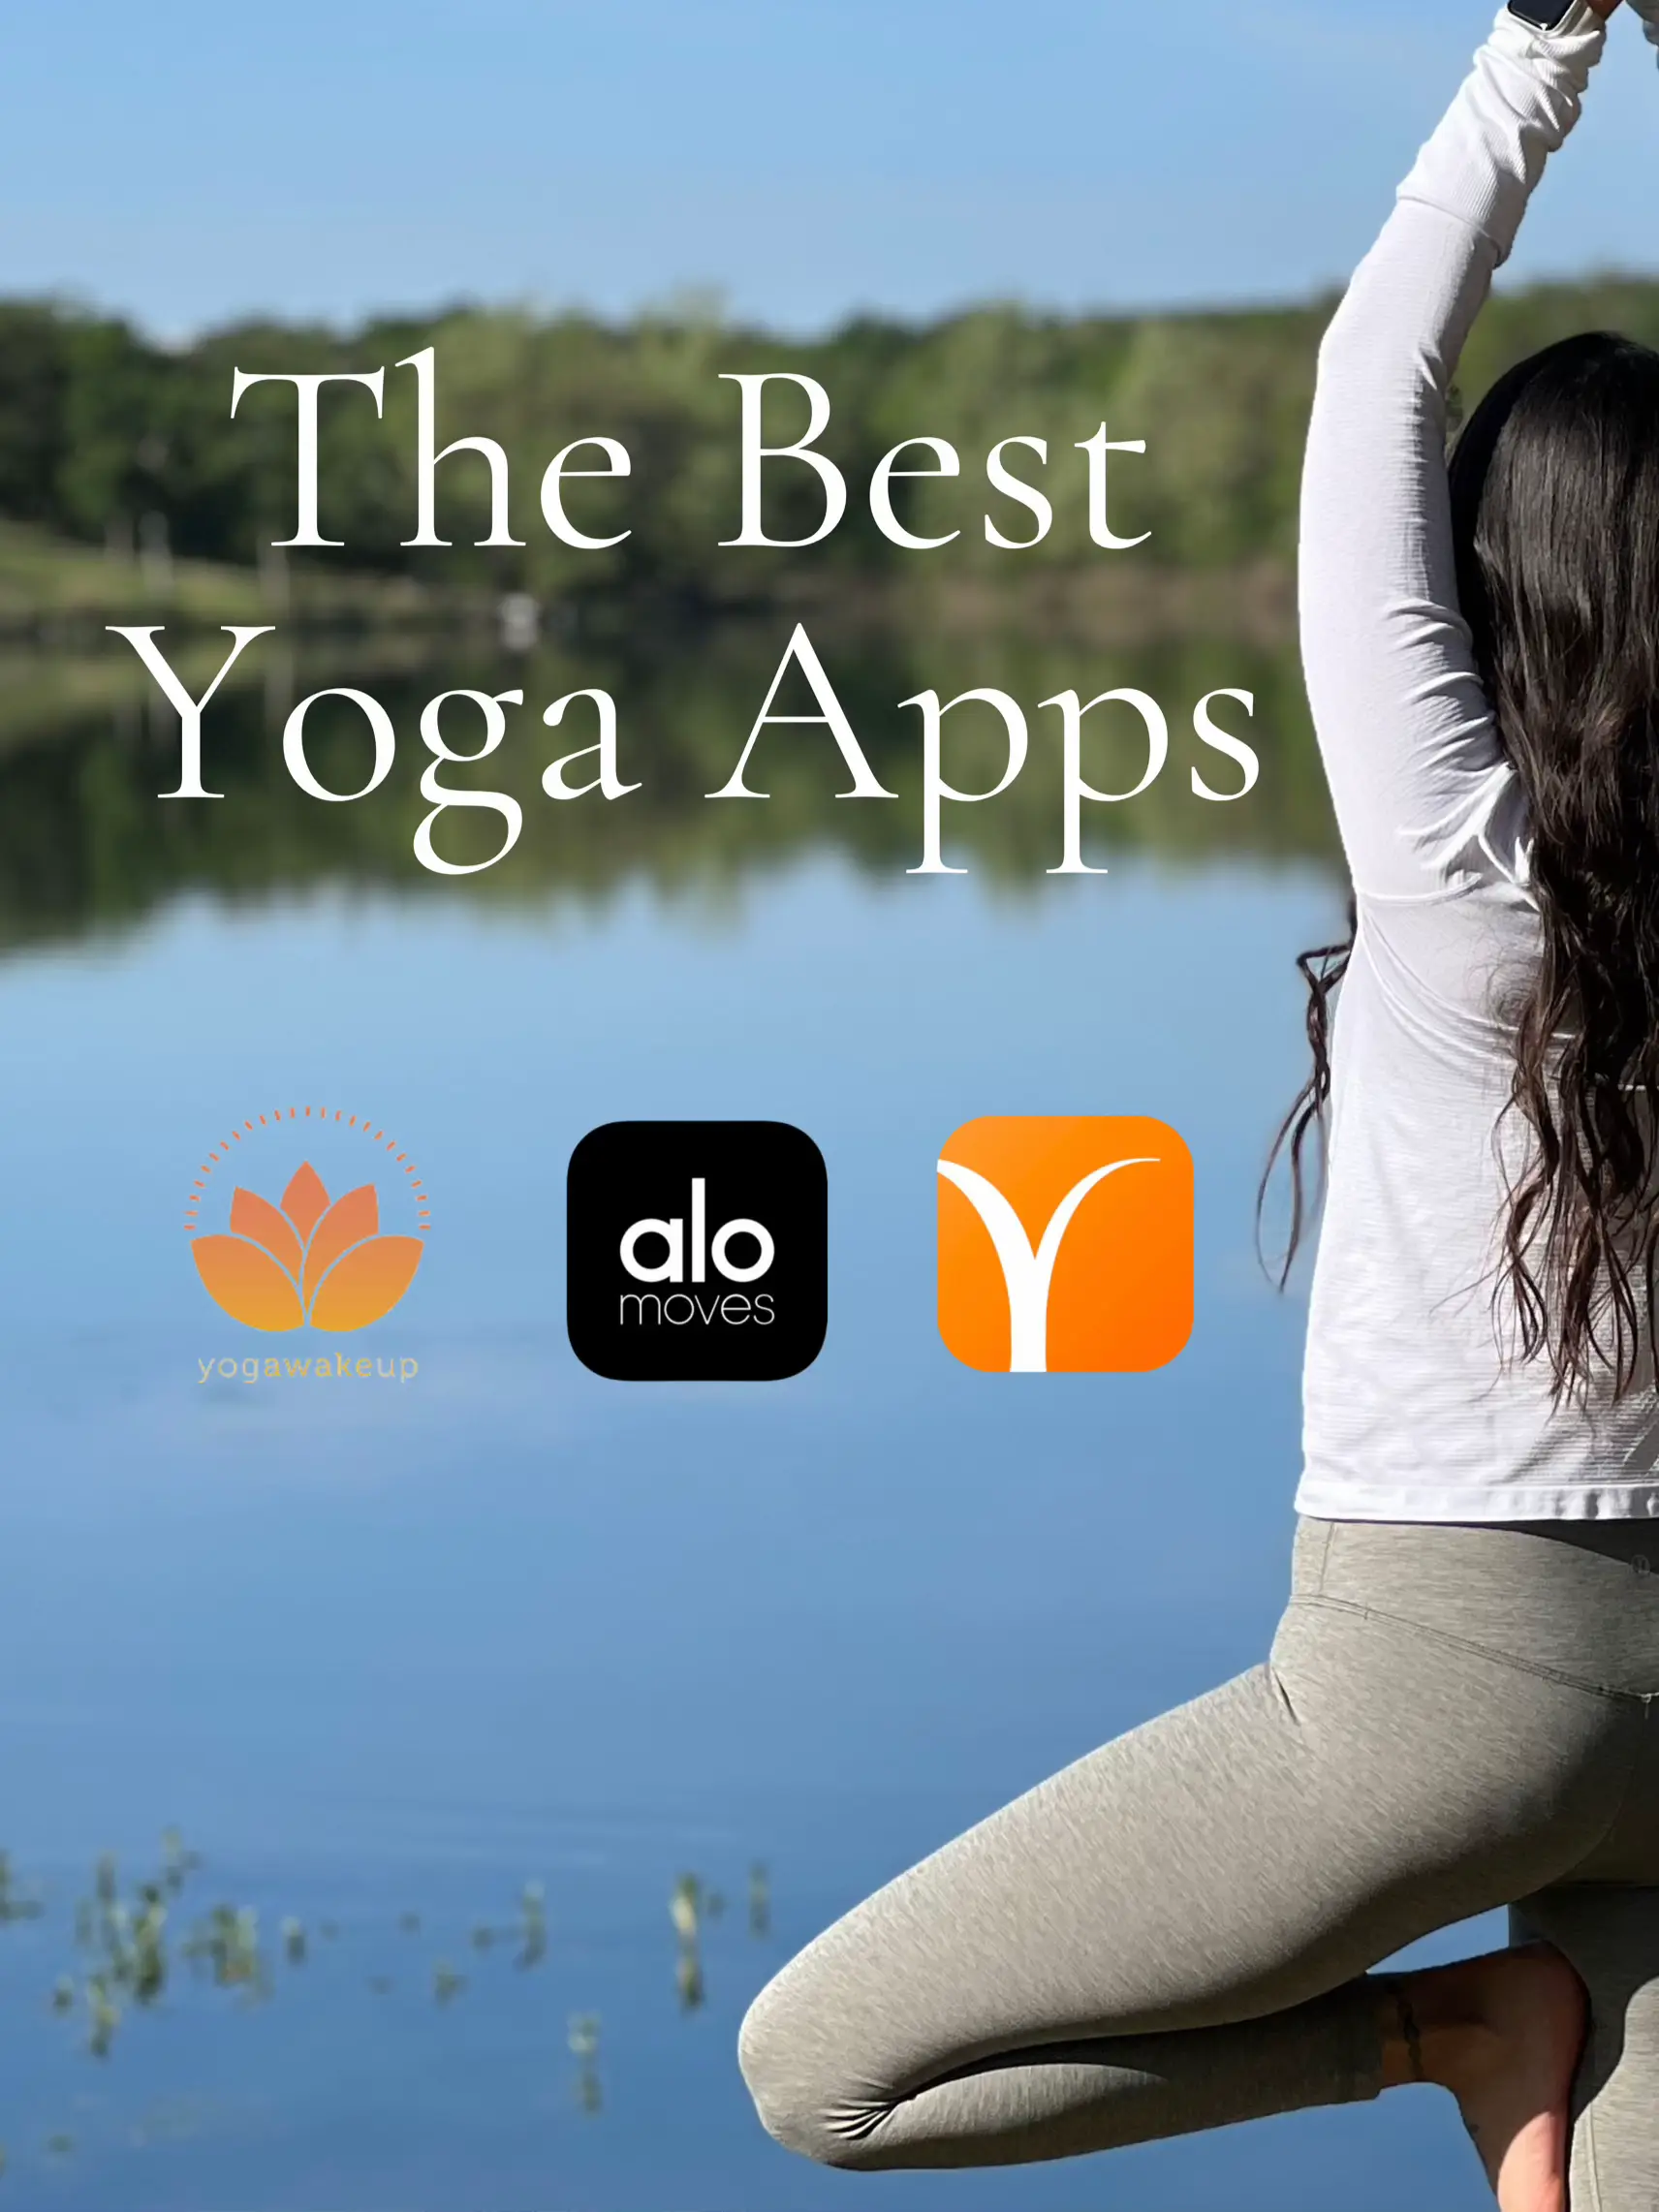 Yoga With Adriene To Watch And Learn From Free Yoga Videos Online And  Offline